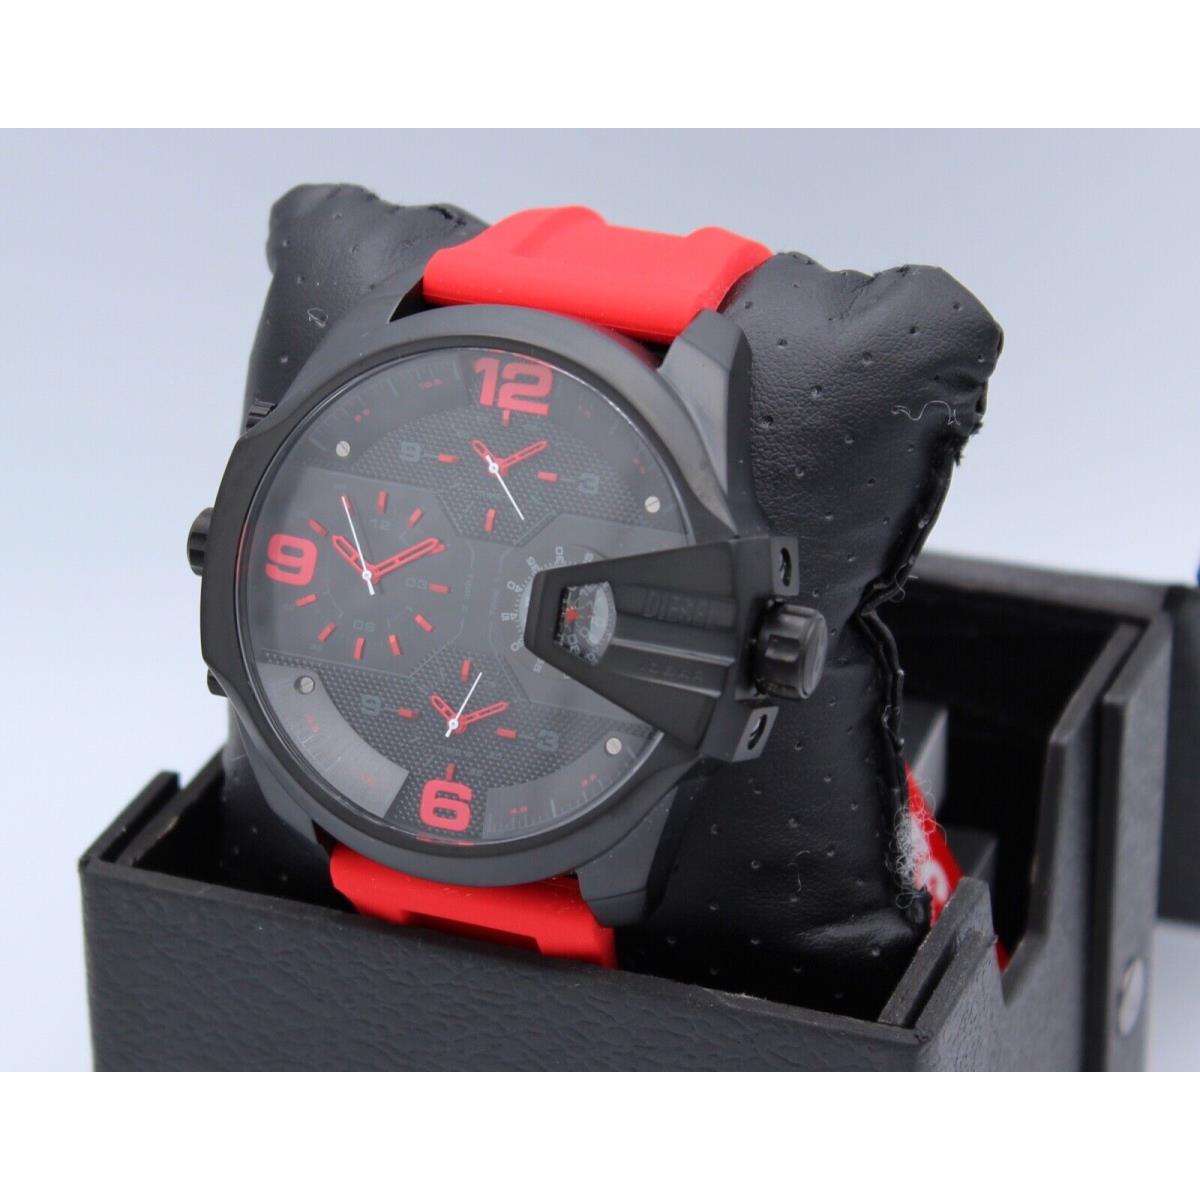 Diesel watch Uber Chief - Black Dial, Red Band, Red Bezel